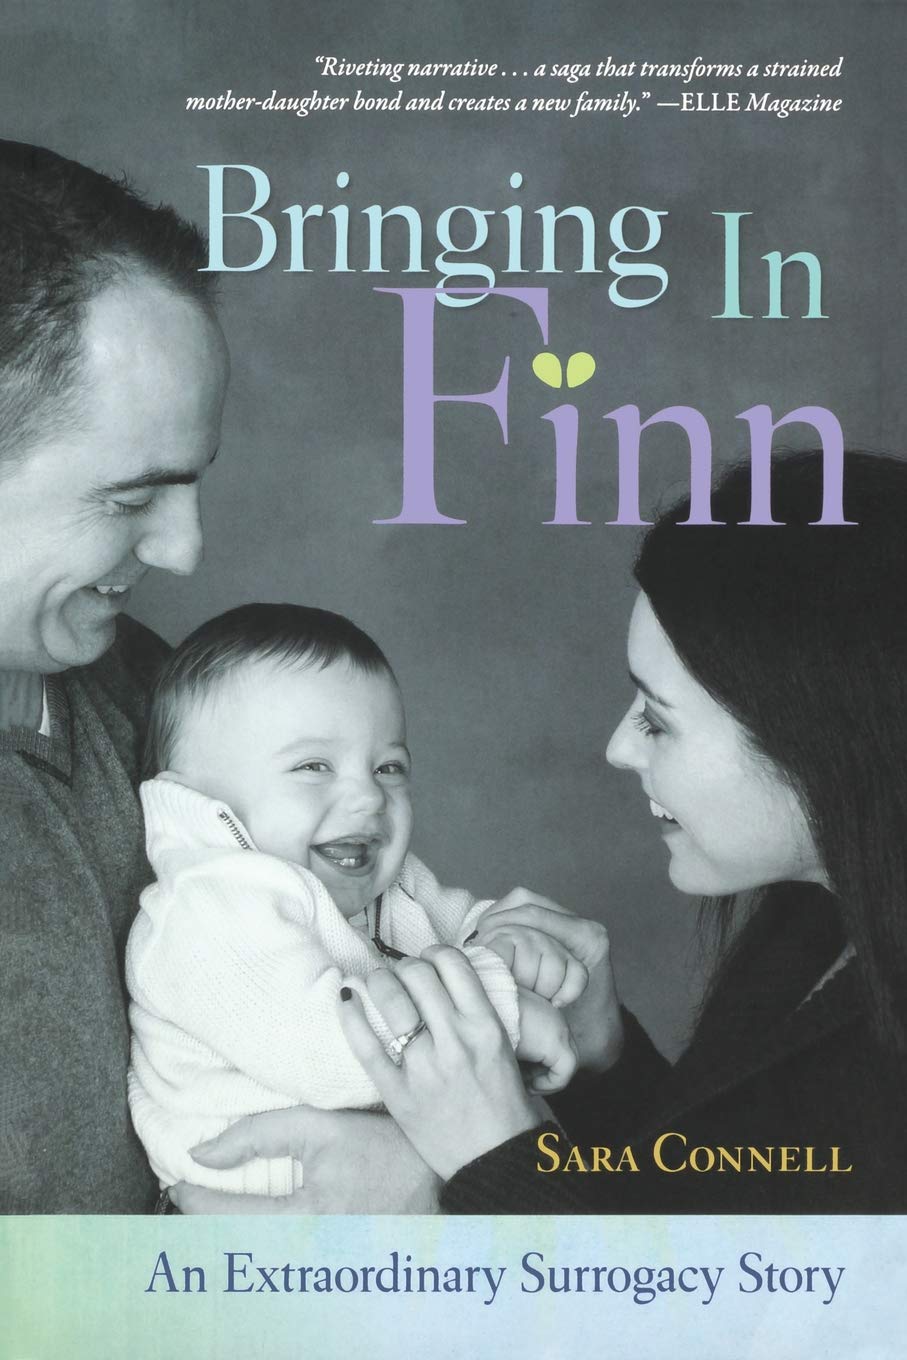 bringing in finn by sara connell